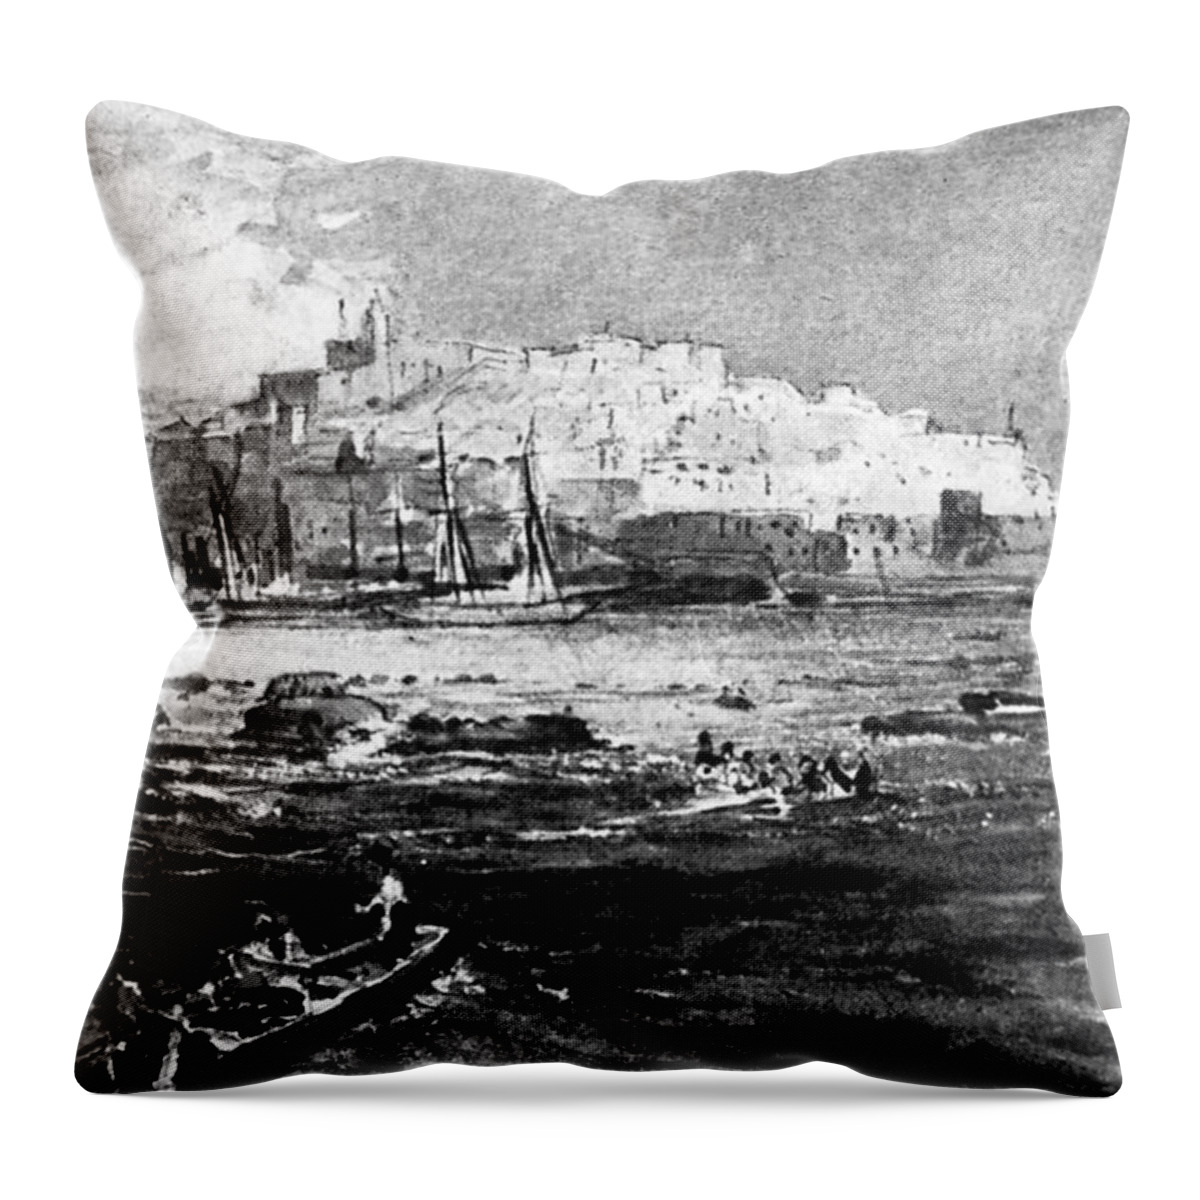 Jaffa Throw Pillow featuring the photograph Jaffa And The Sea by Munir Alawi